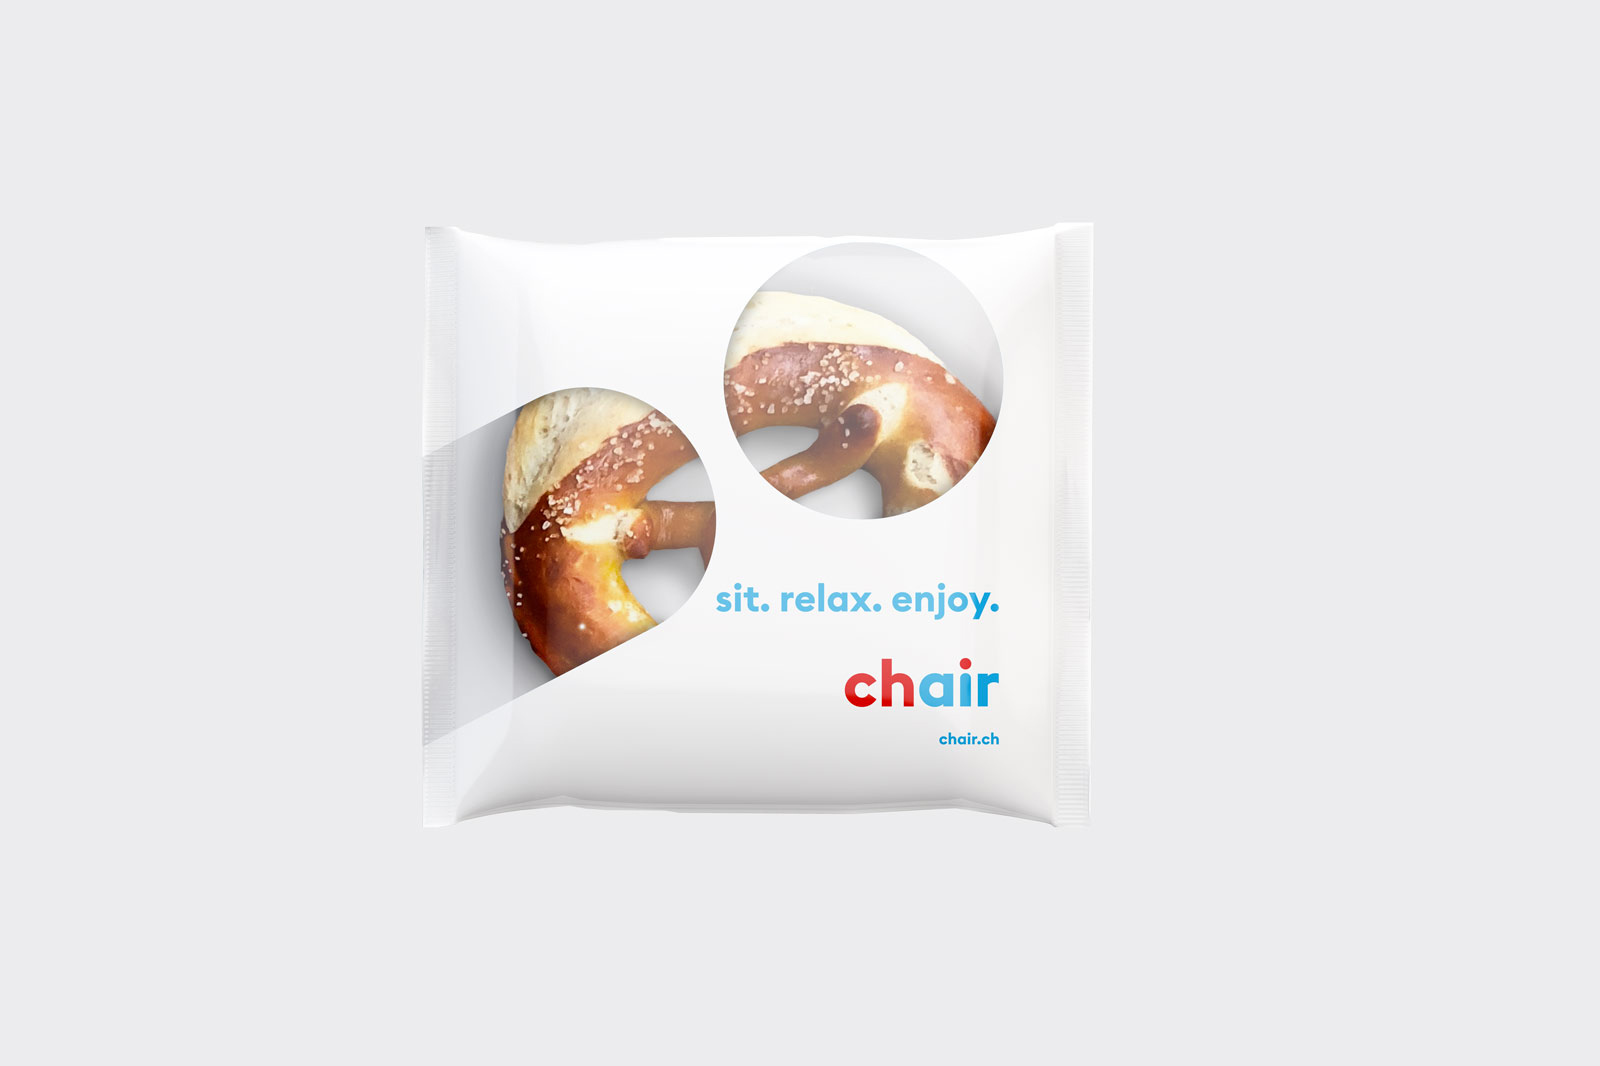 New Logo, Identity, and Livery for Chair by Branders